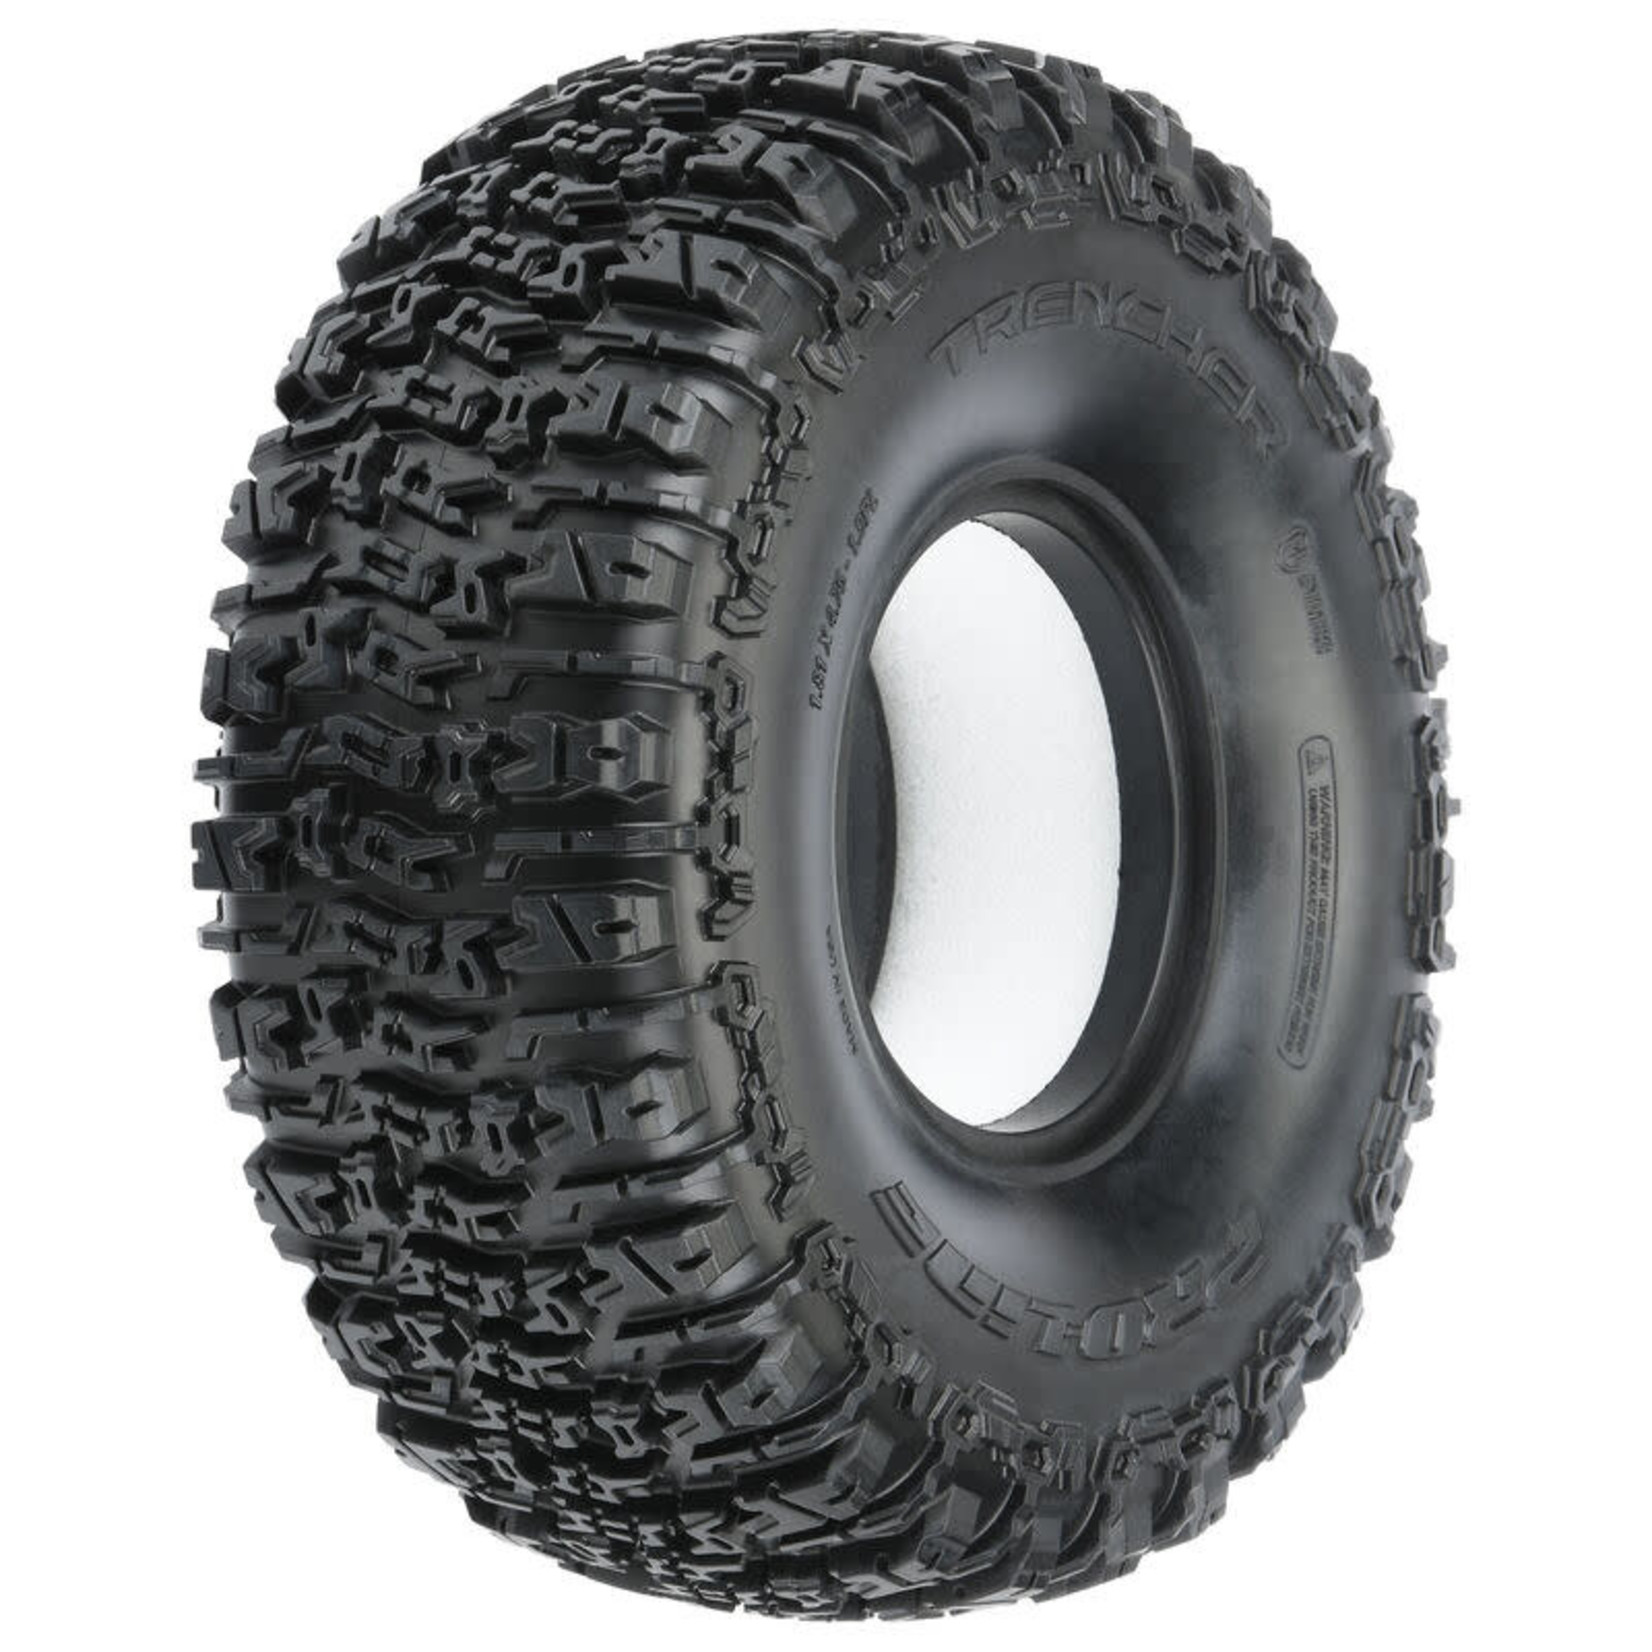 Pro-line Racing PRO1018303 Pro-Line 1/10 Trencher Predator Front/Rear 1.9" Rock Crawling Tires (2)